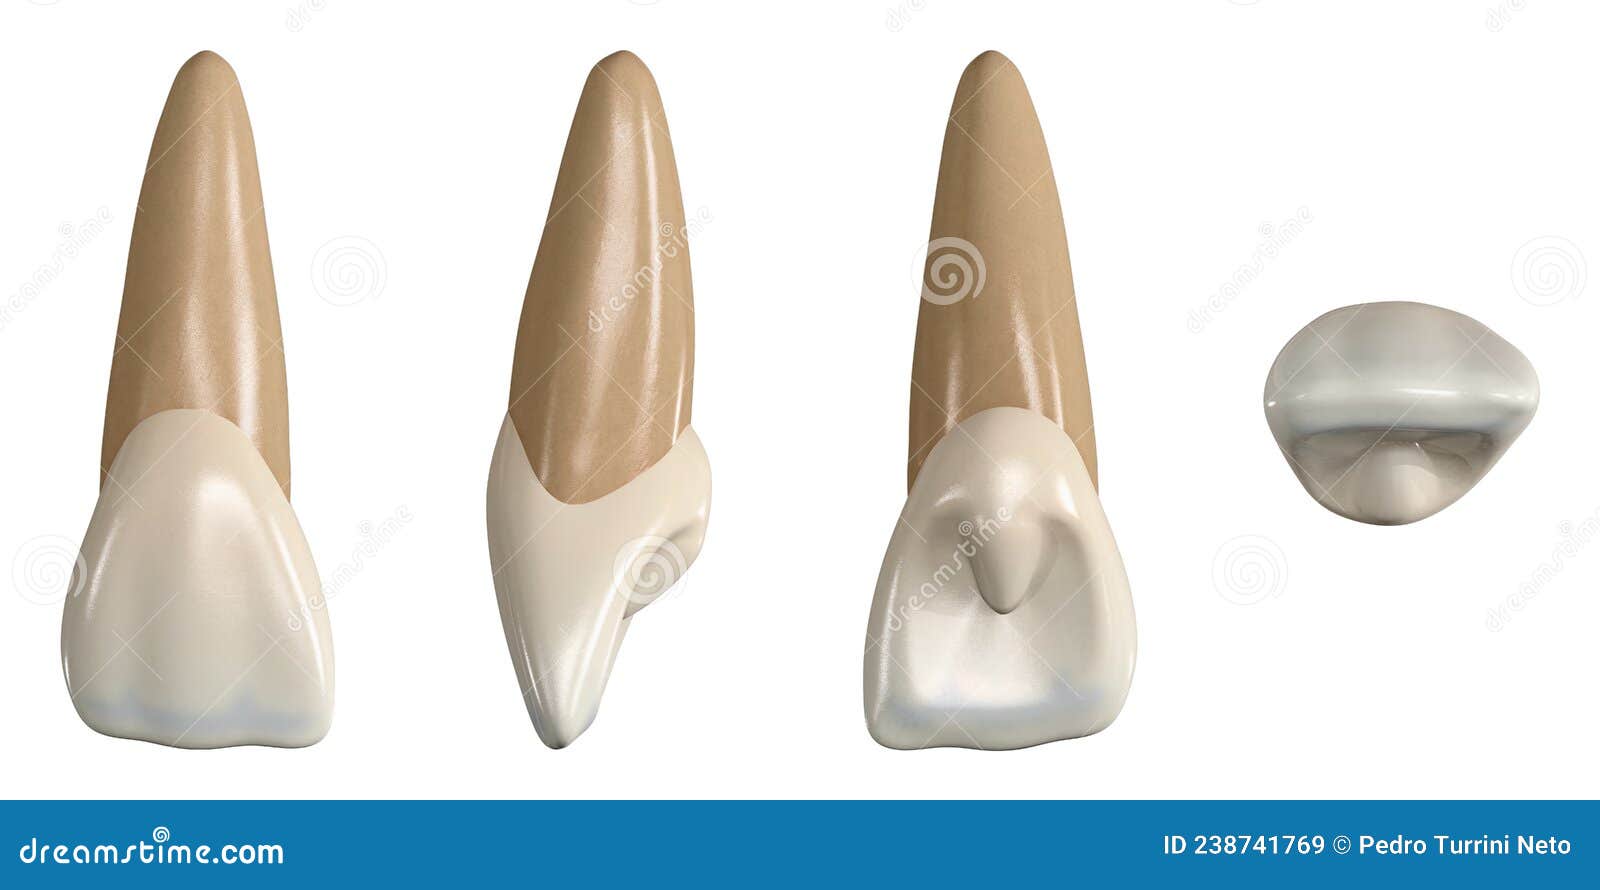 permanent upper central incisor tooth. 3d  of the anatomy of the maxillary central incisor tooth in buccal, proximal,